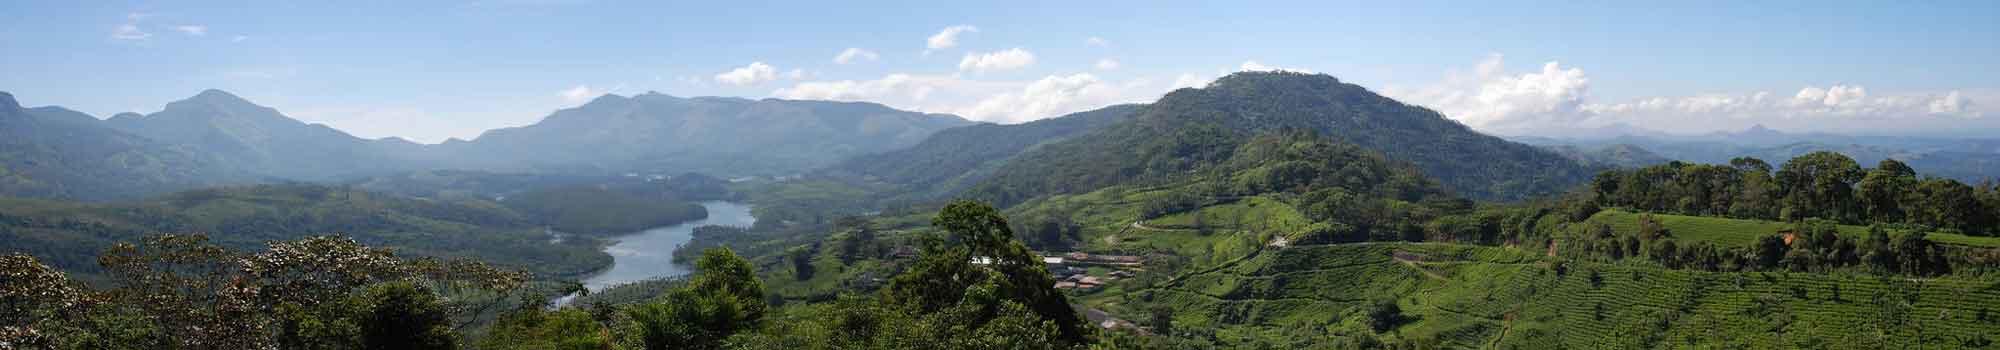 Thekkady tourism | Best places to visit in Thekkady and things to do